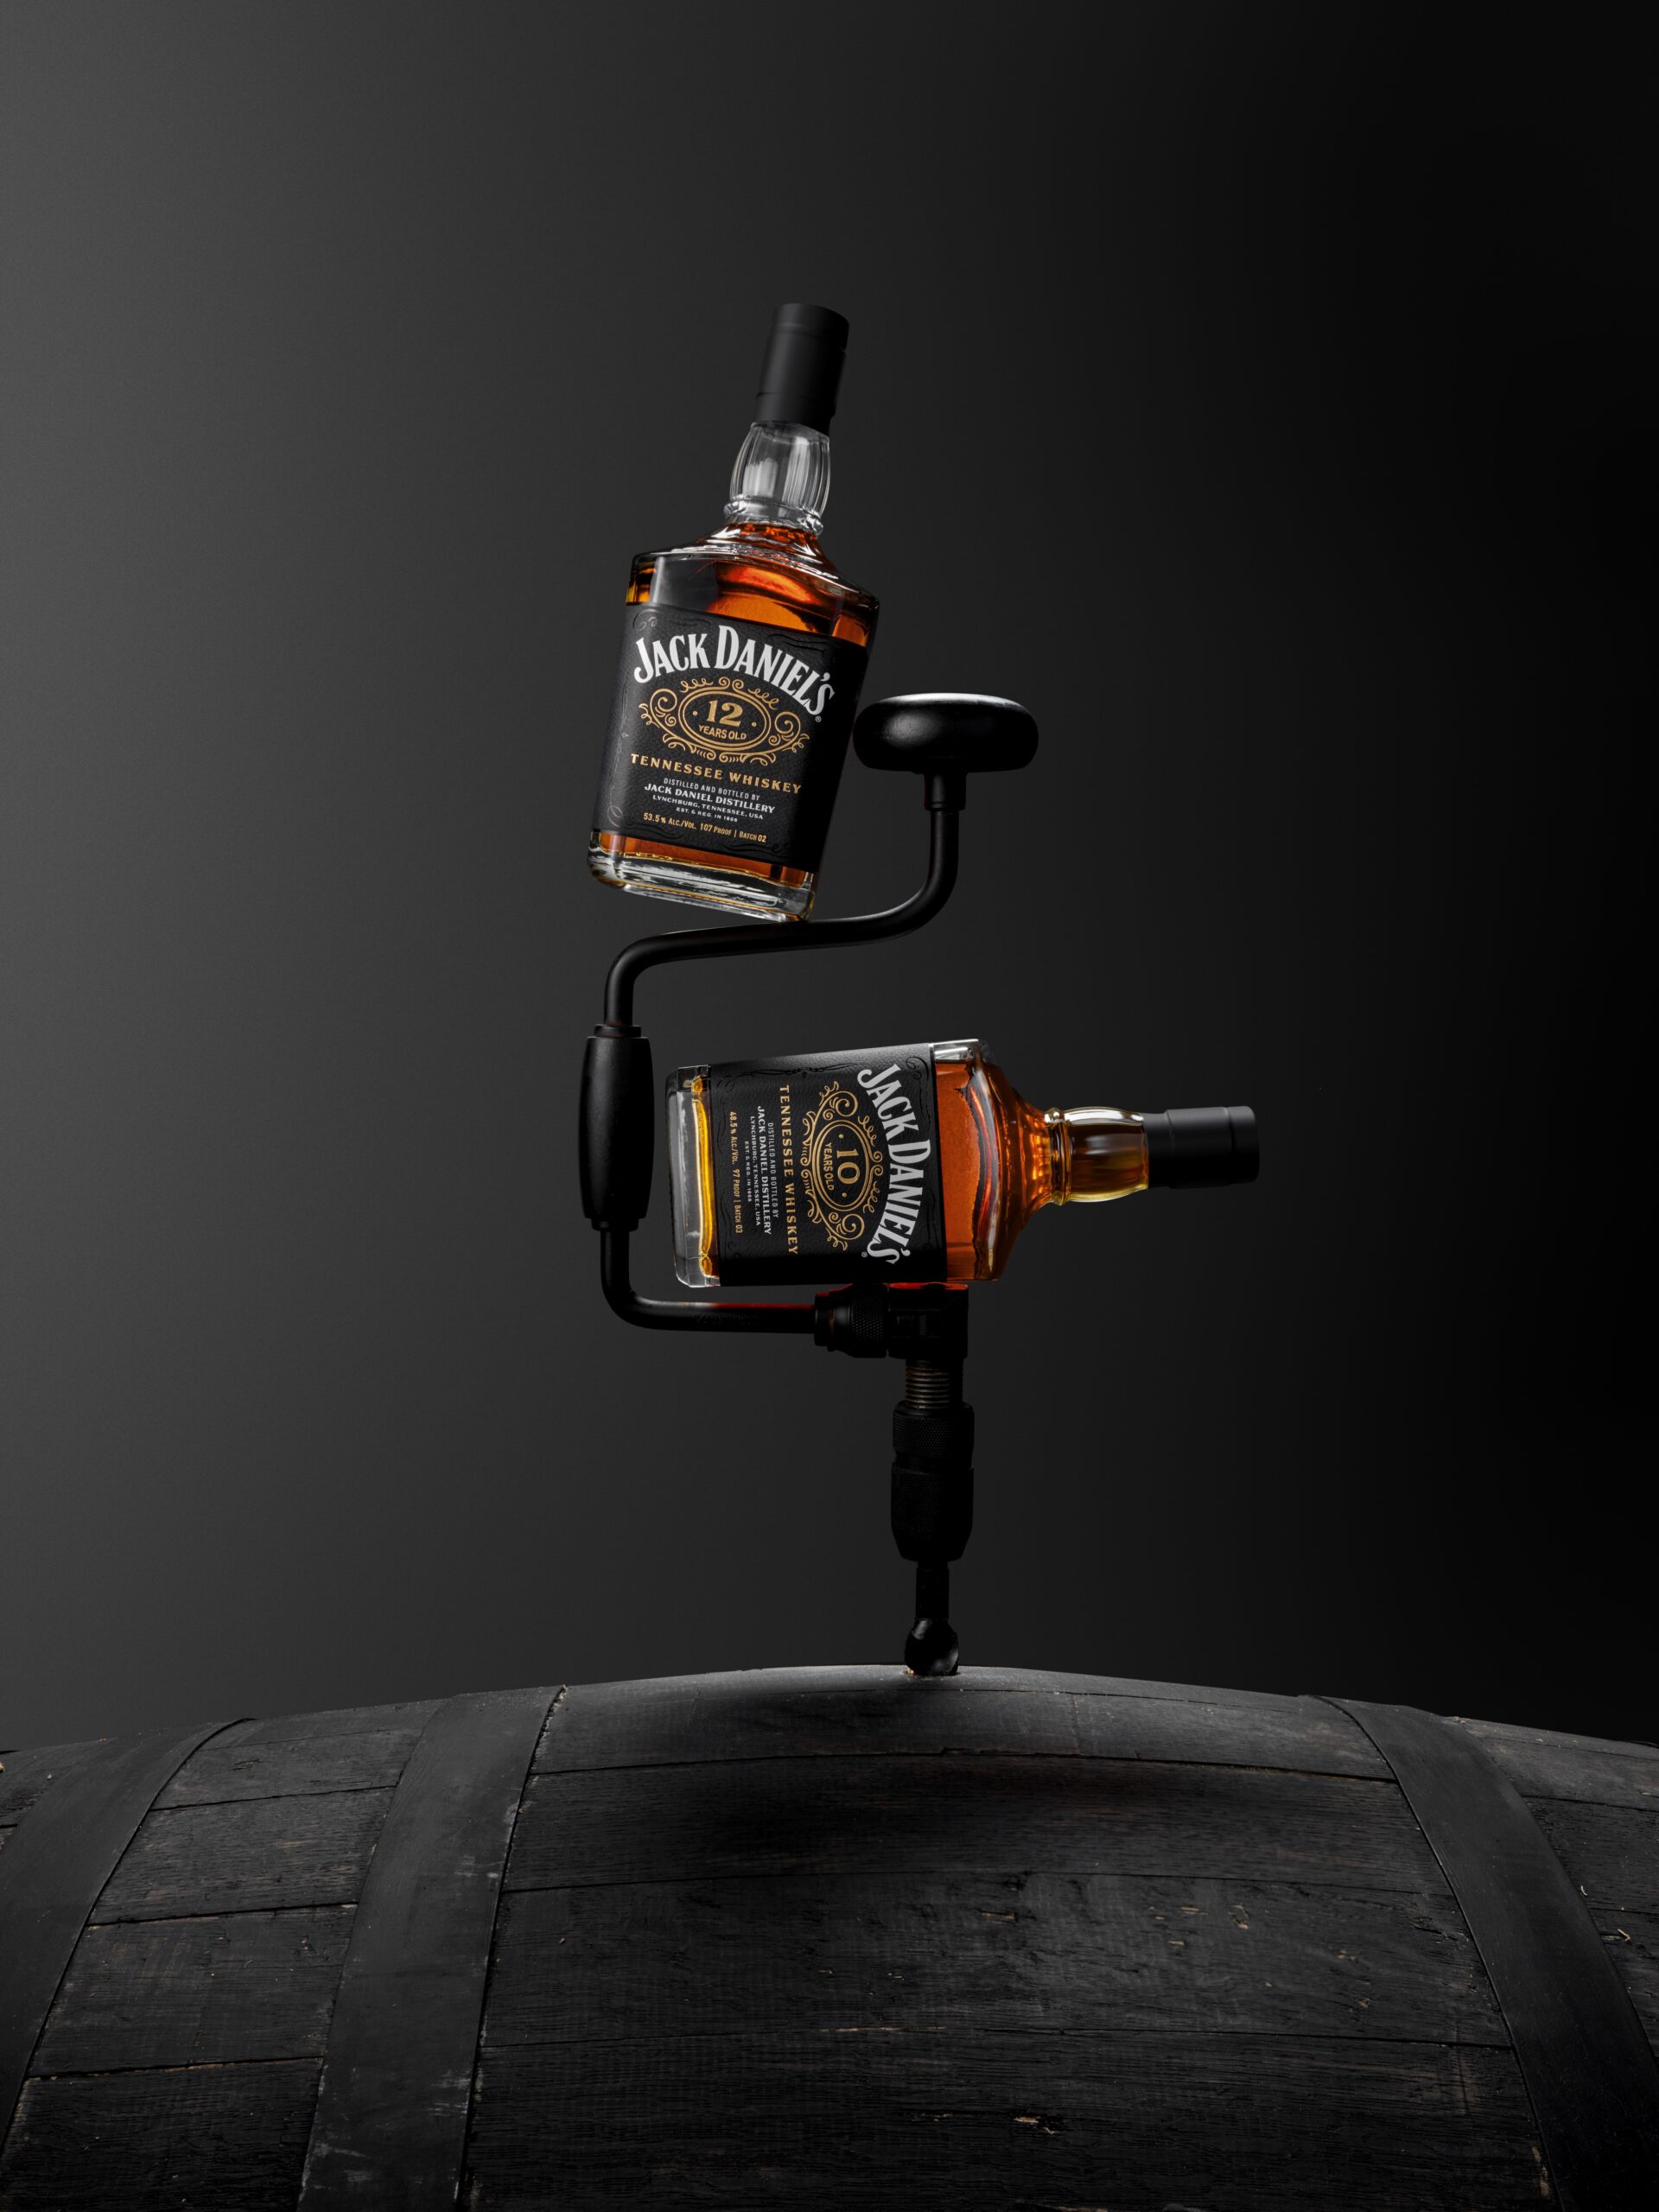 Jack Daniel’s Launches New Batches in its Aged Series of Tennessee Whiskey